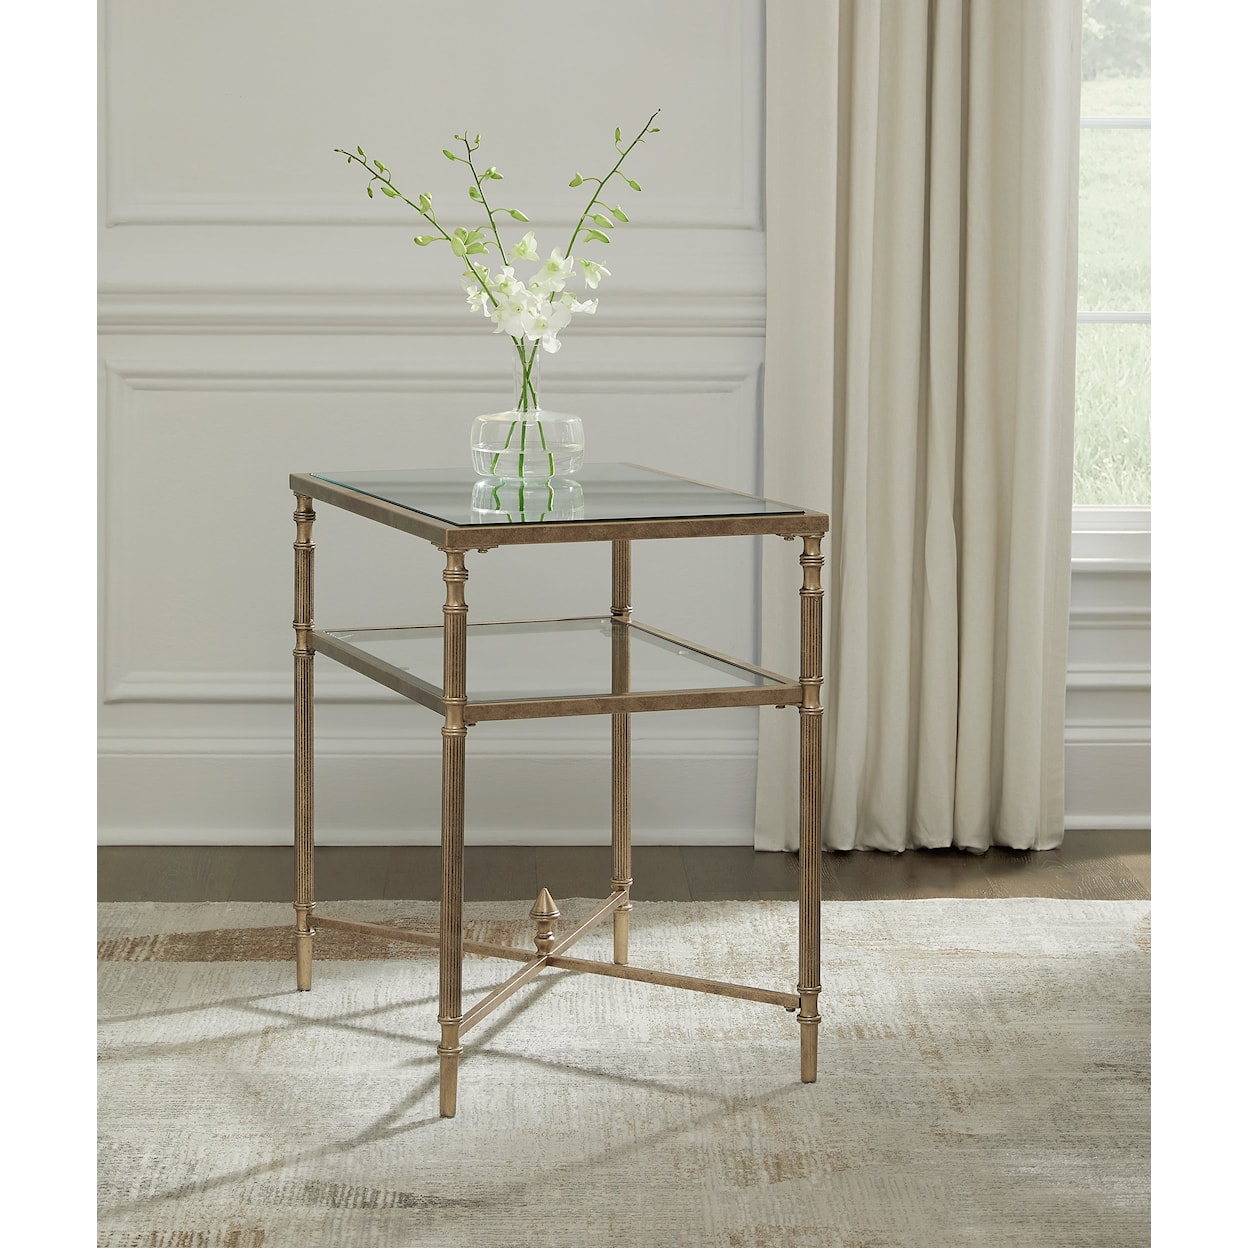 Benchcraft Cloverty Rectangular End Table